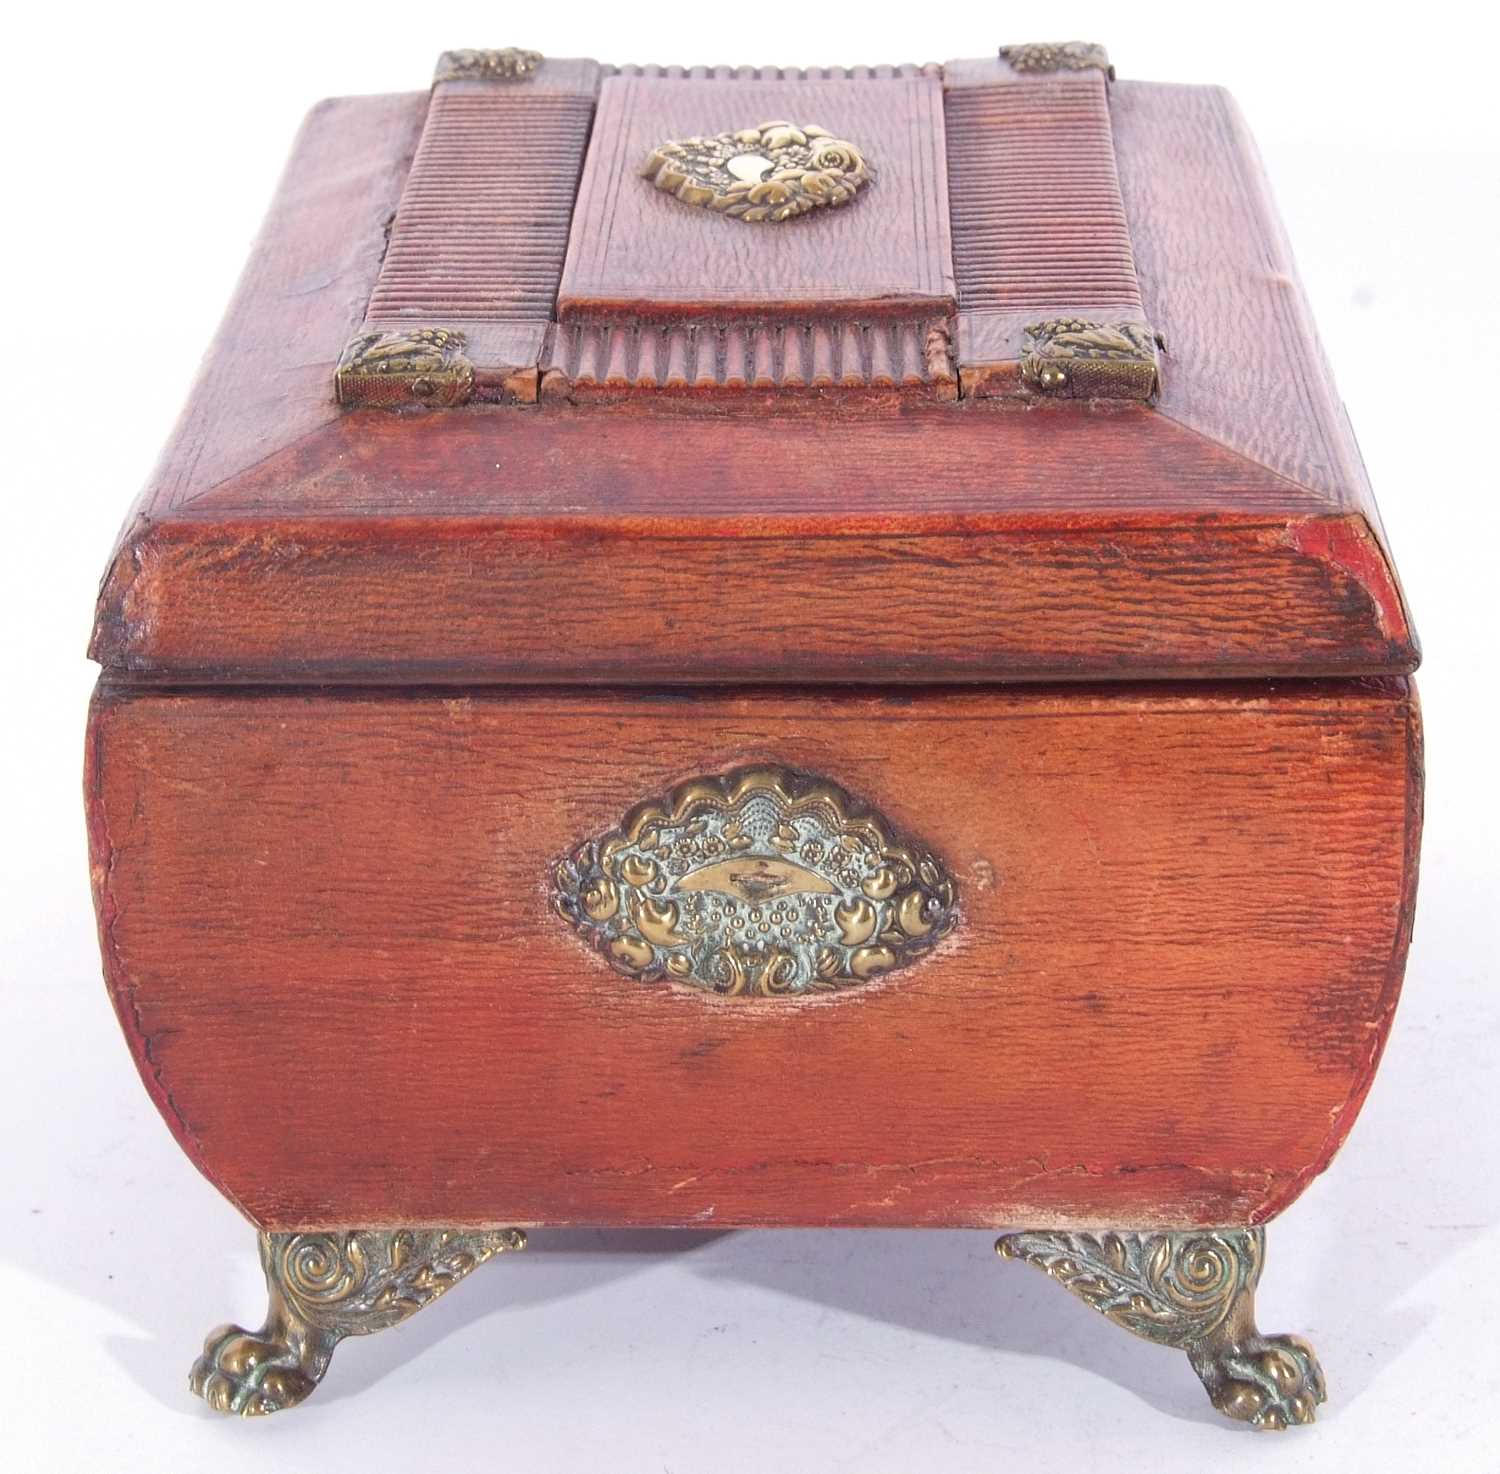 Regency red leather and brass embossed jewel box, hinged lid with silk lined interior, single drawer - Image 4 of 11